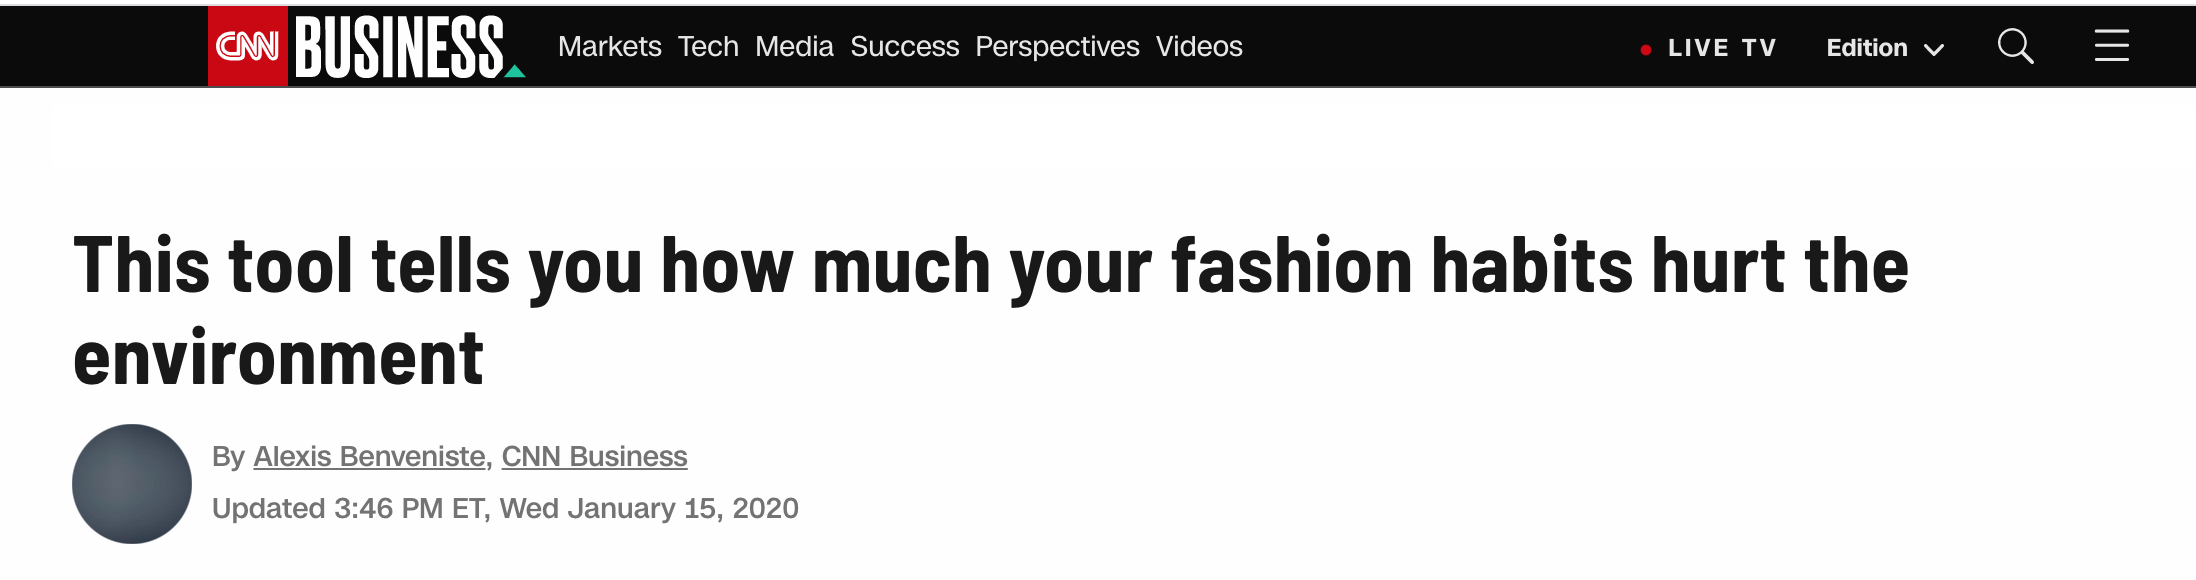 CNN Business Headline, reads: "This tool tells you how much your fashion habits hurt the environment"